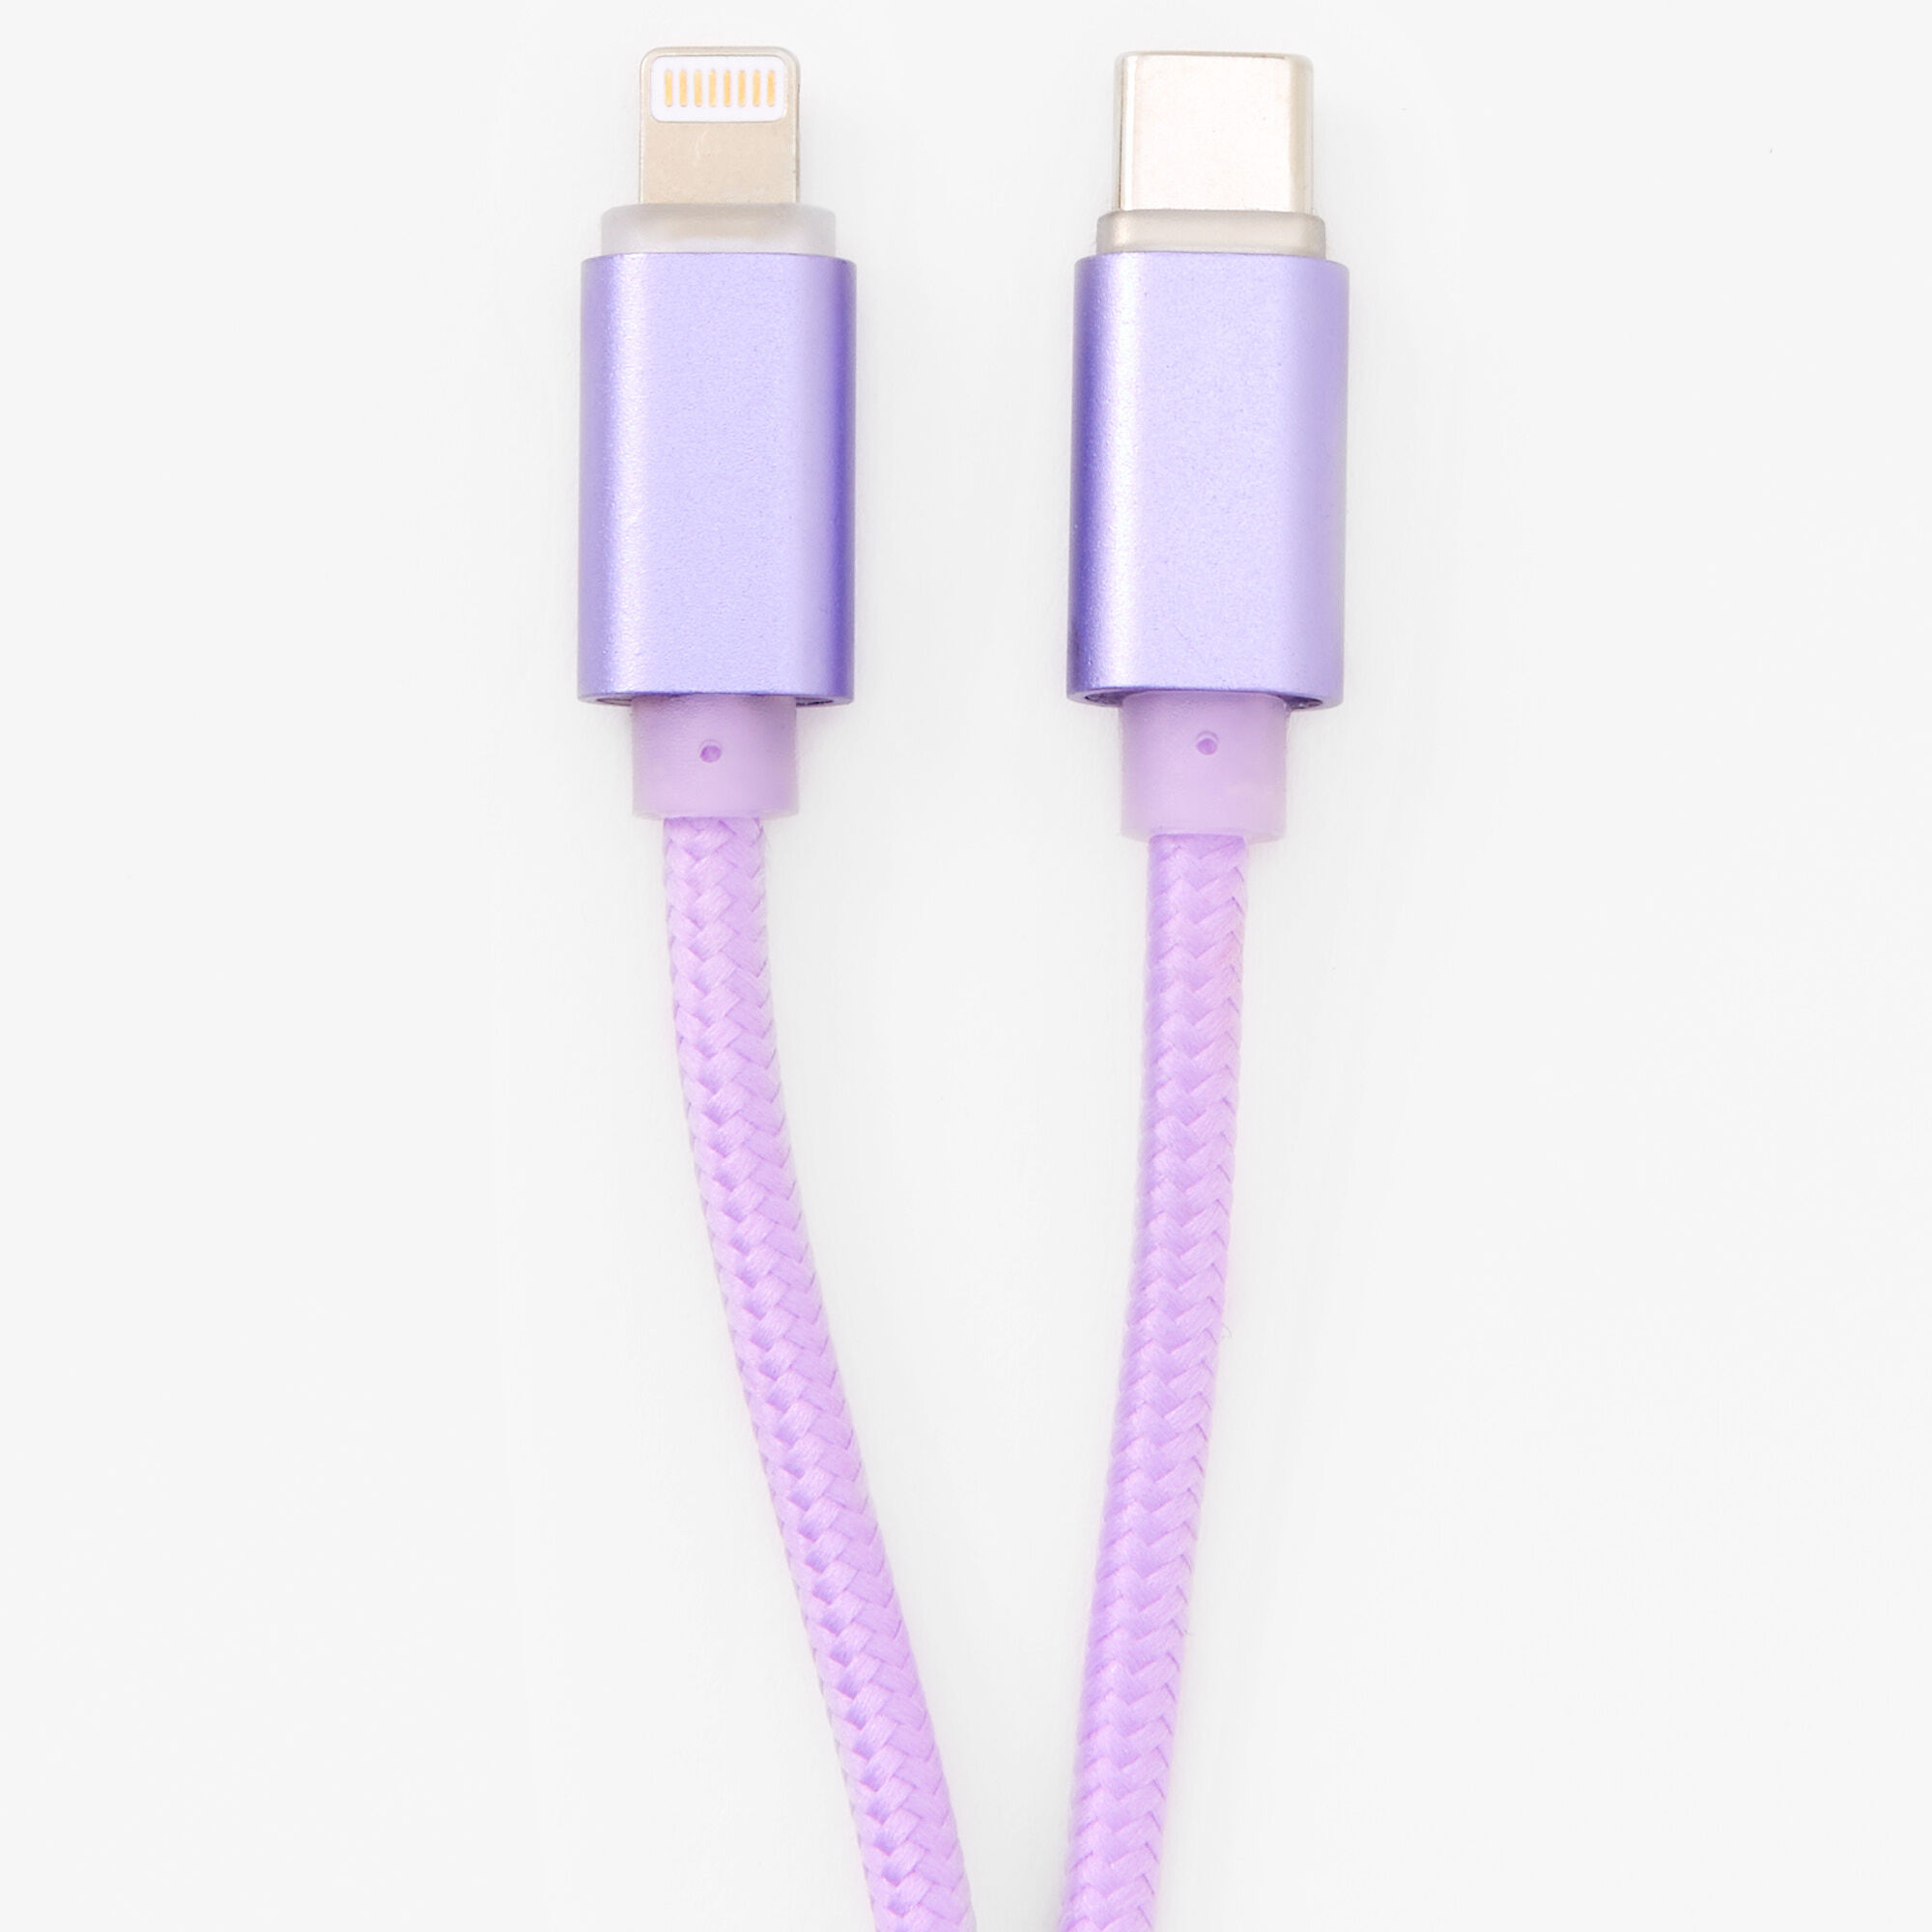 View Claires UsbC 10Ft Charging Cord Lavender information